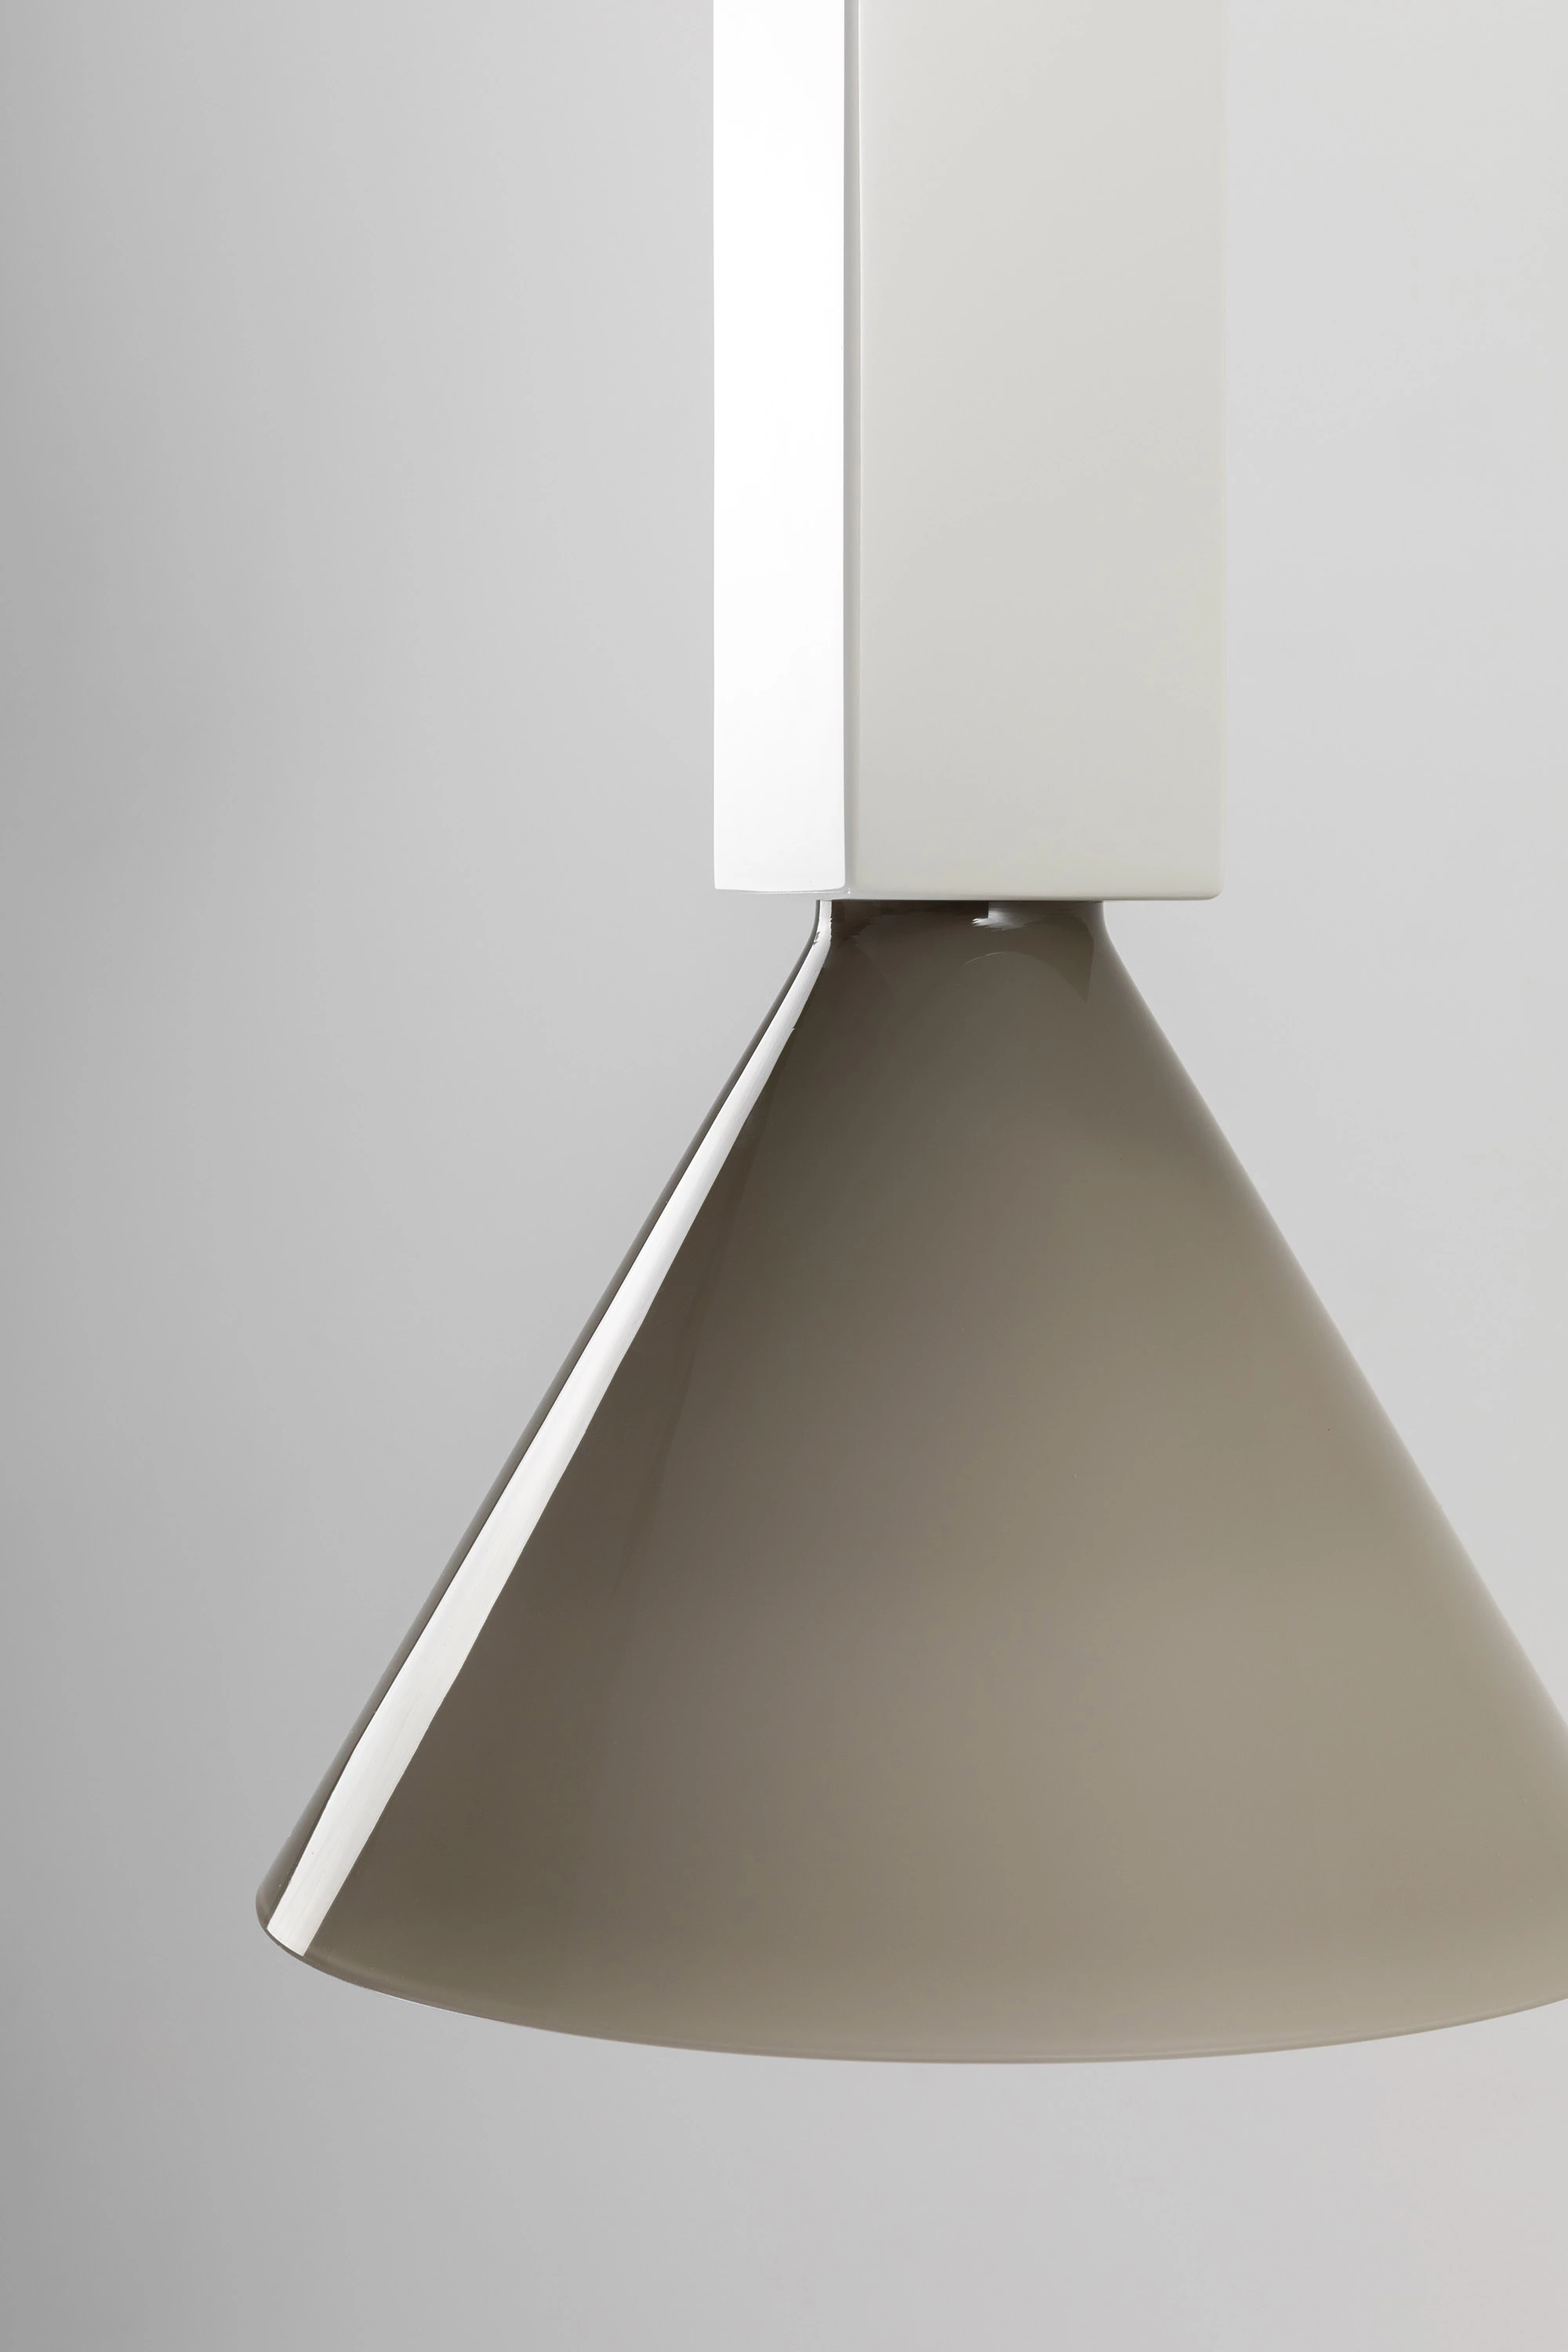 Signal C1 MONOCHROMATIC - Edward and Jay Barber and Osgerby - Pendant light - Galerie kreo